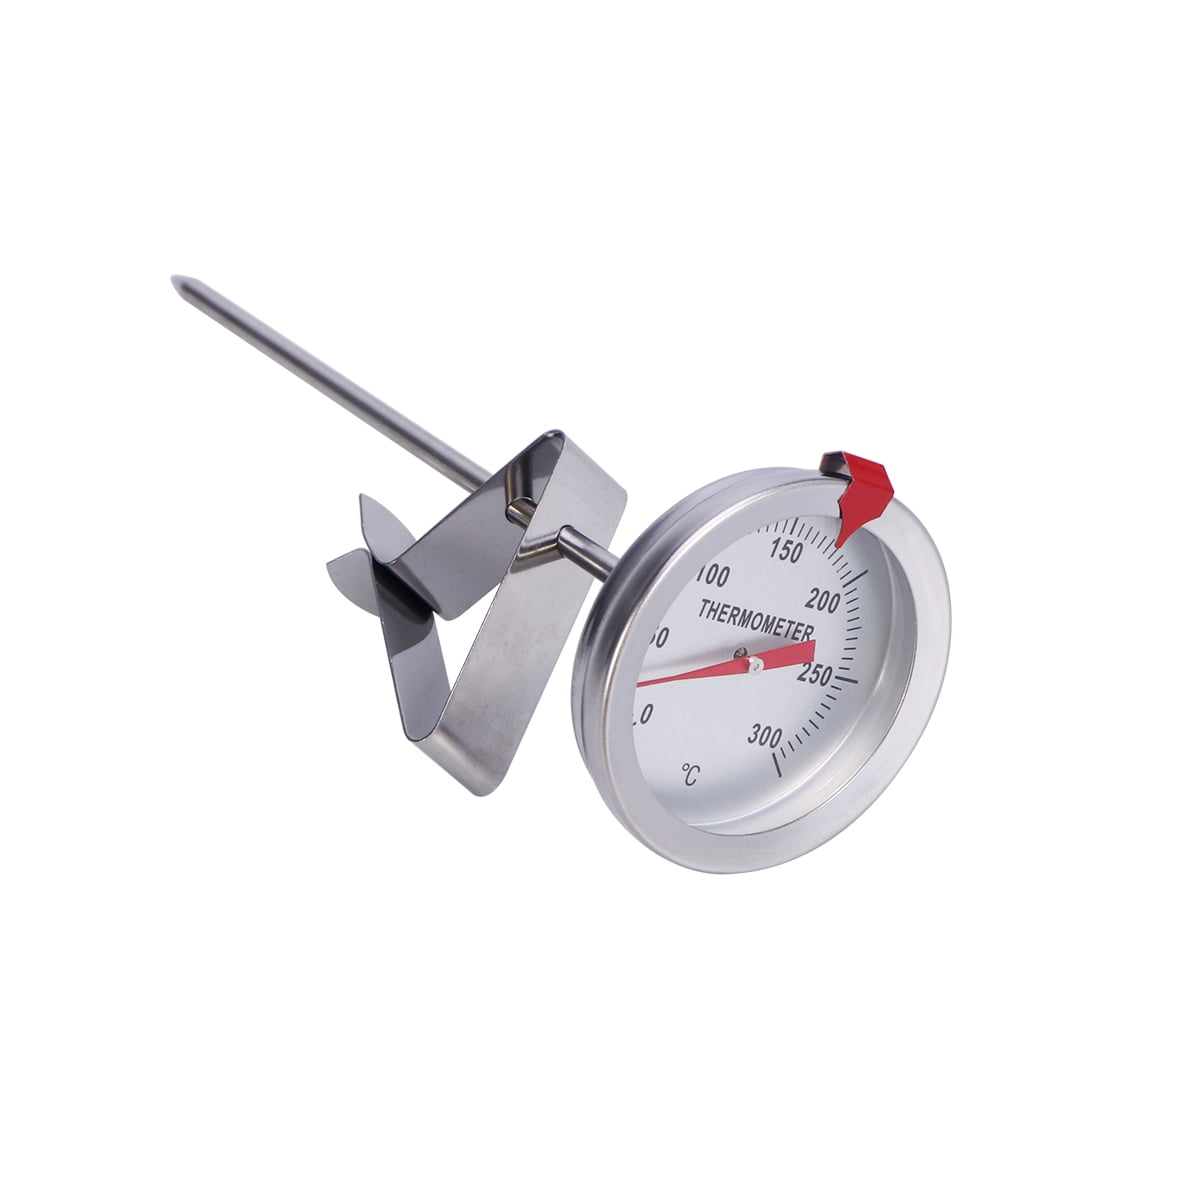 Oil Thermometer for Deep Frying - 150 mm Stainless Steel Deep